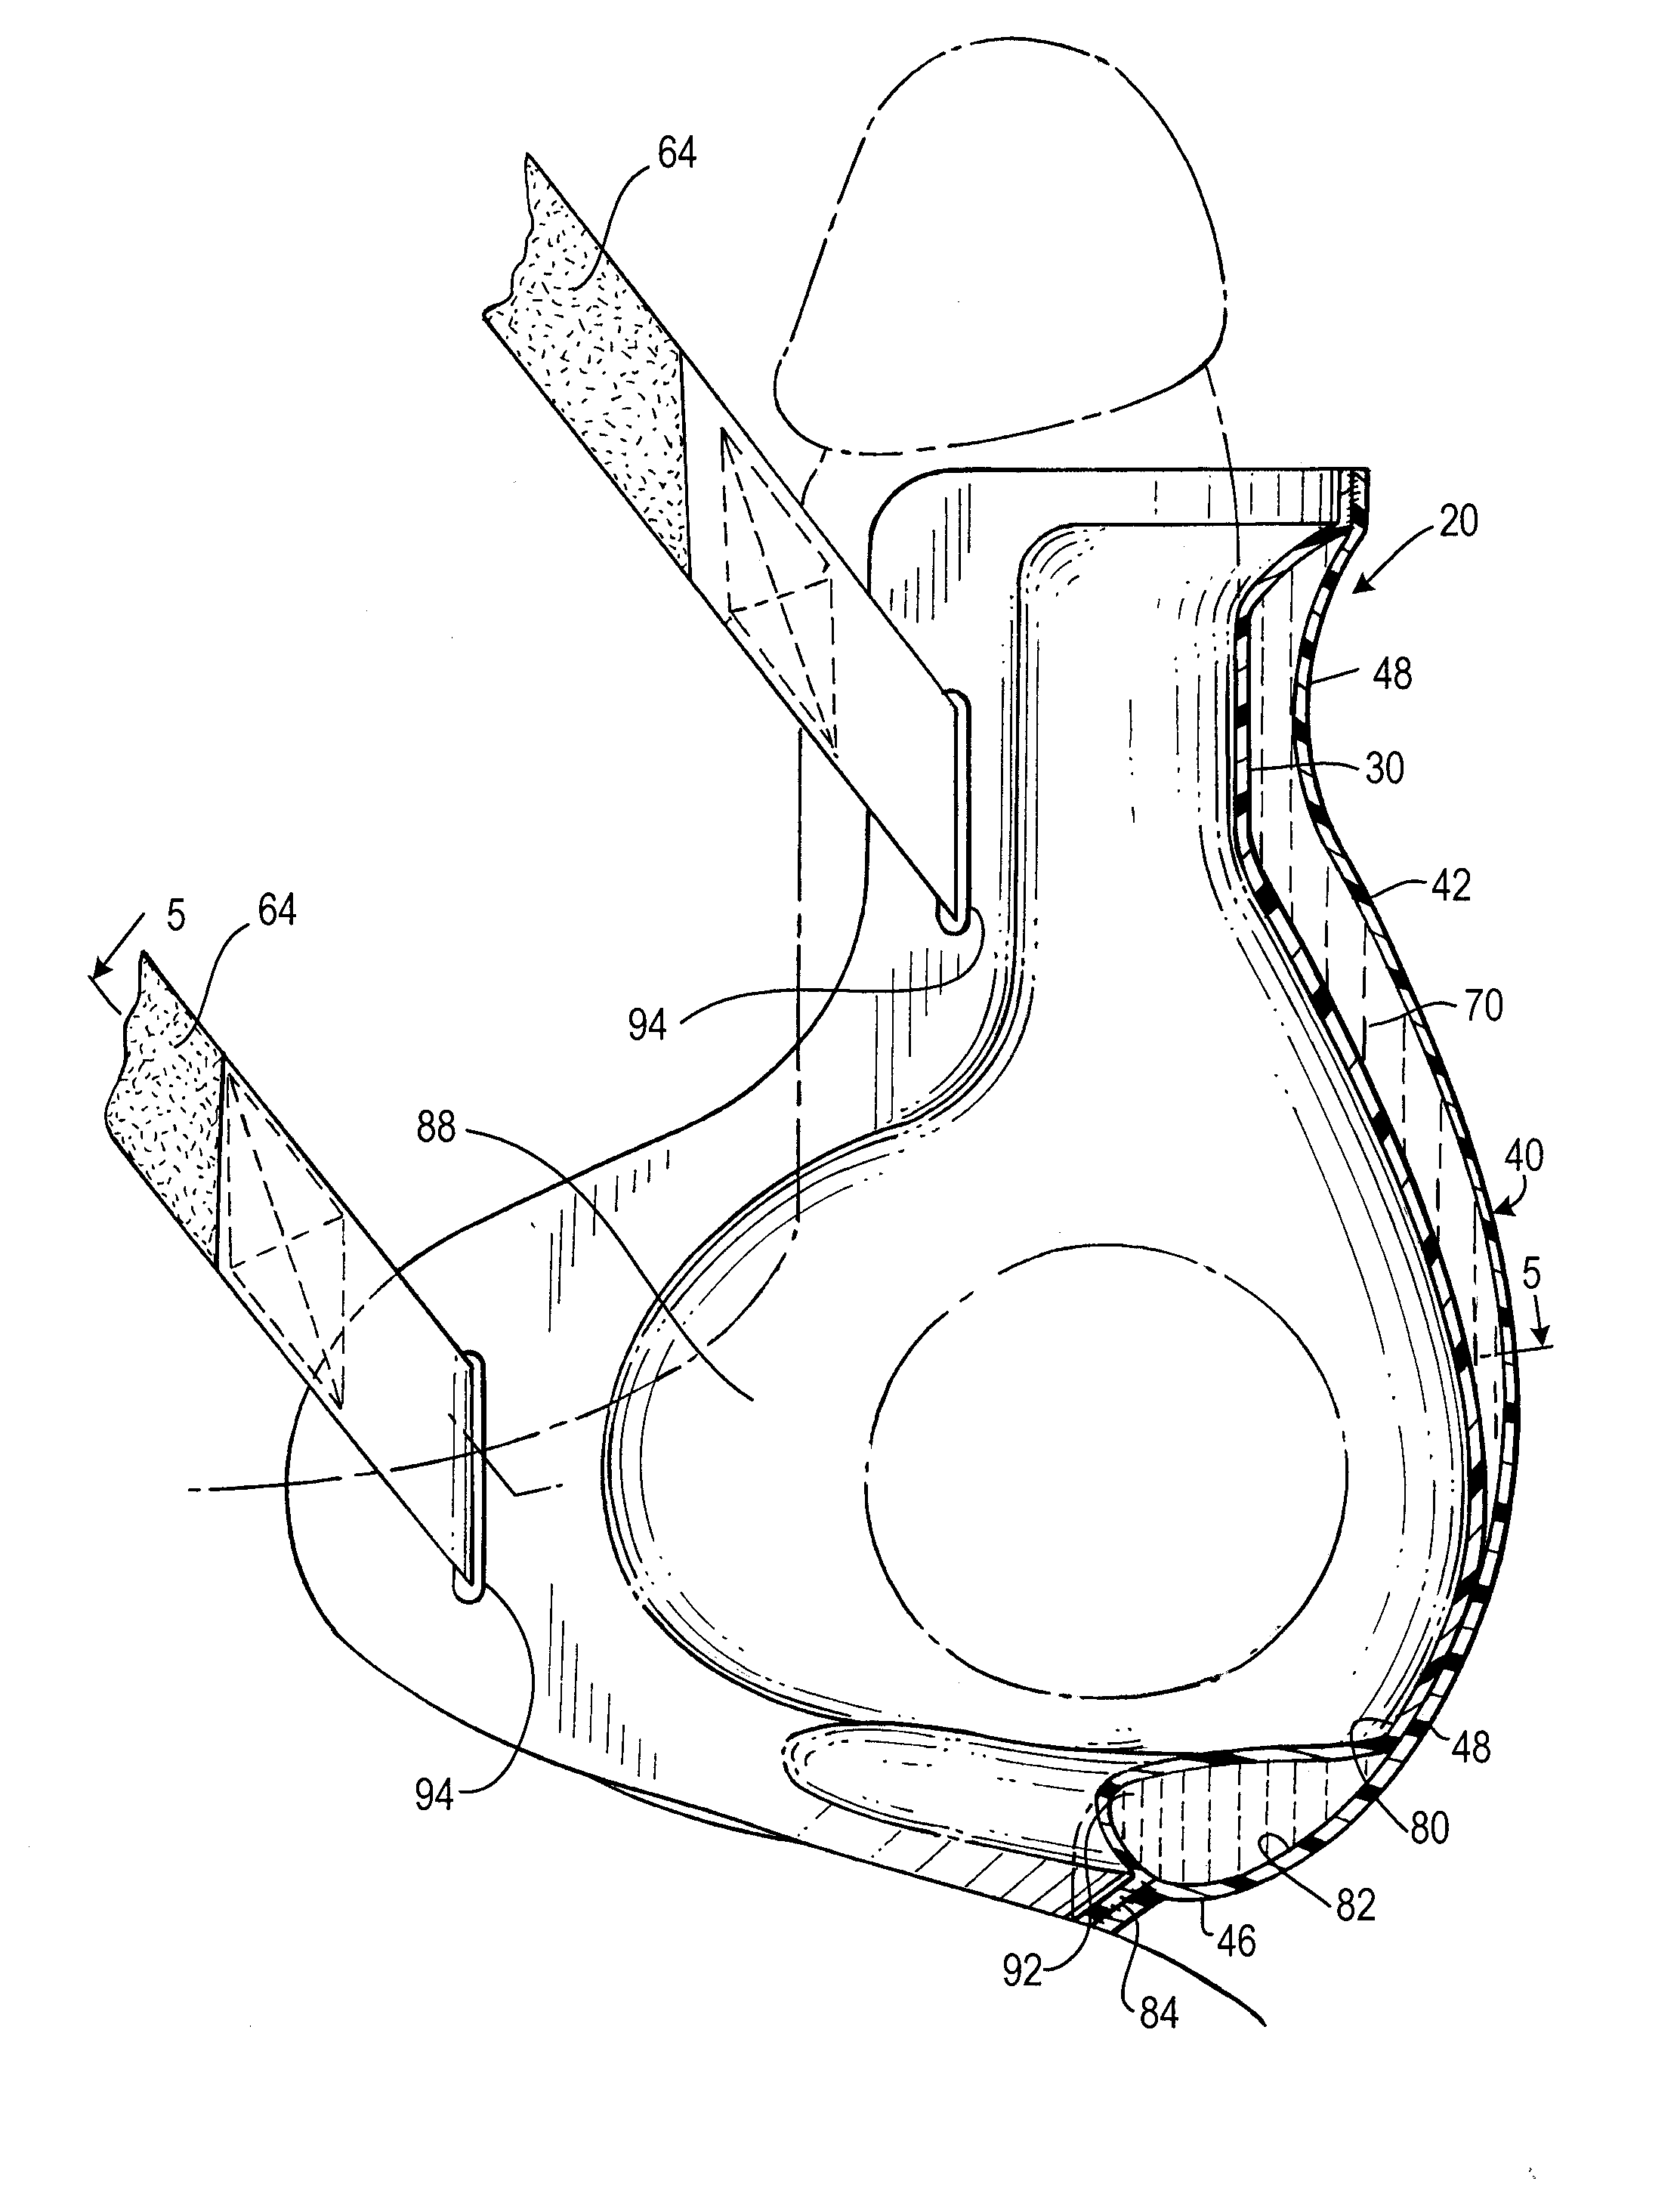 Apparatus and method for thermal therapy treatment to male genitalia